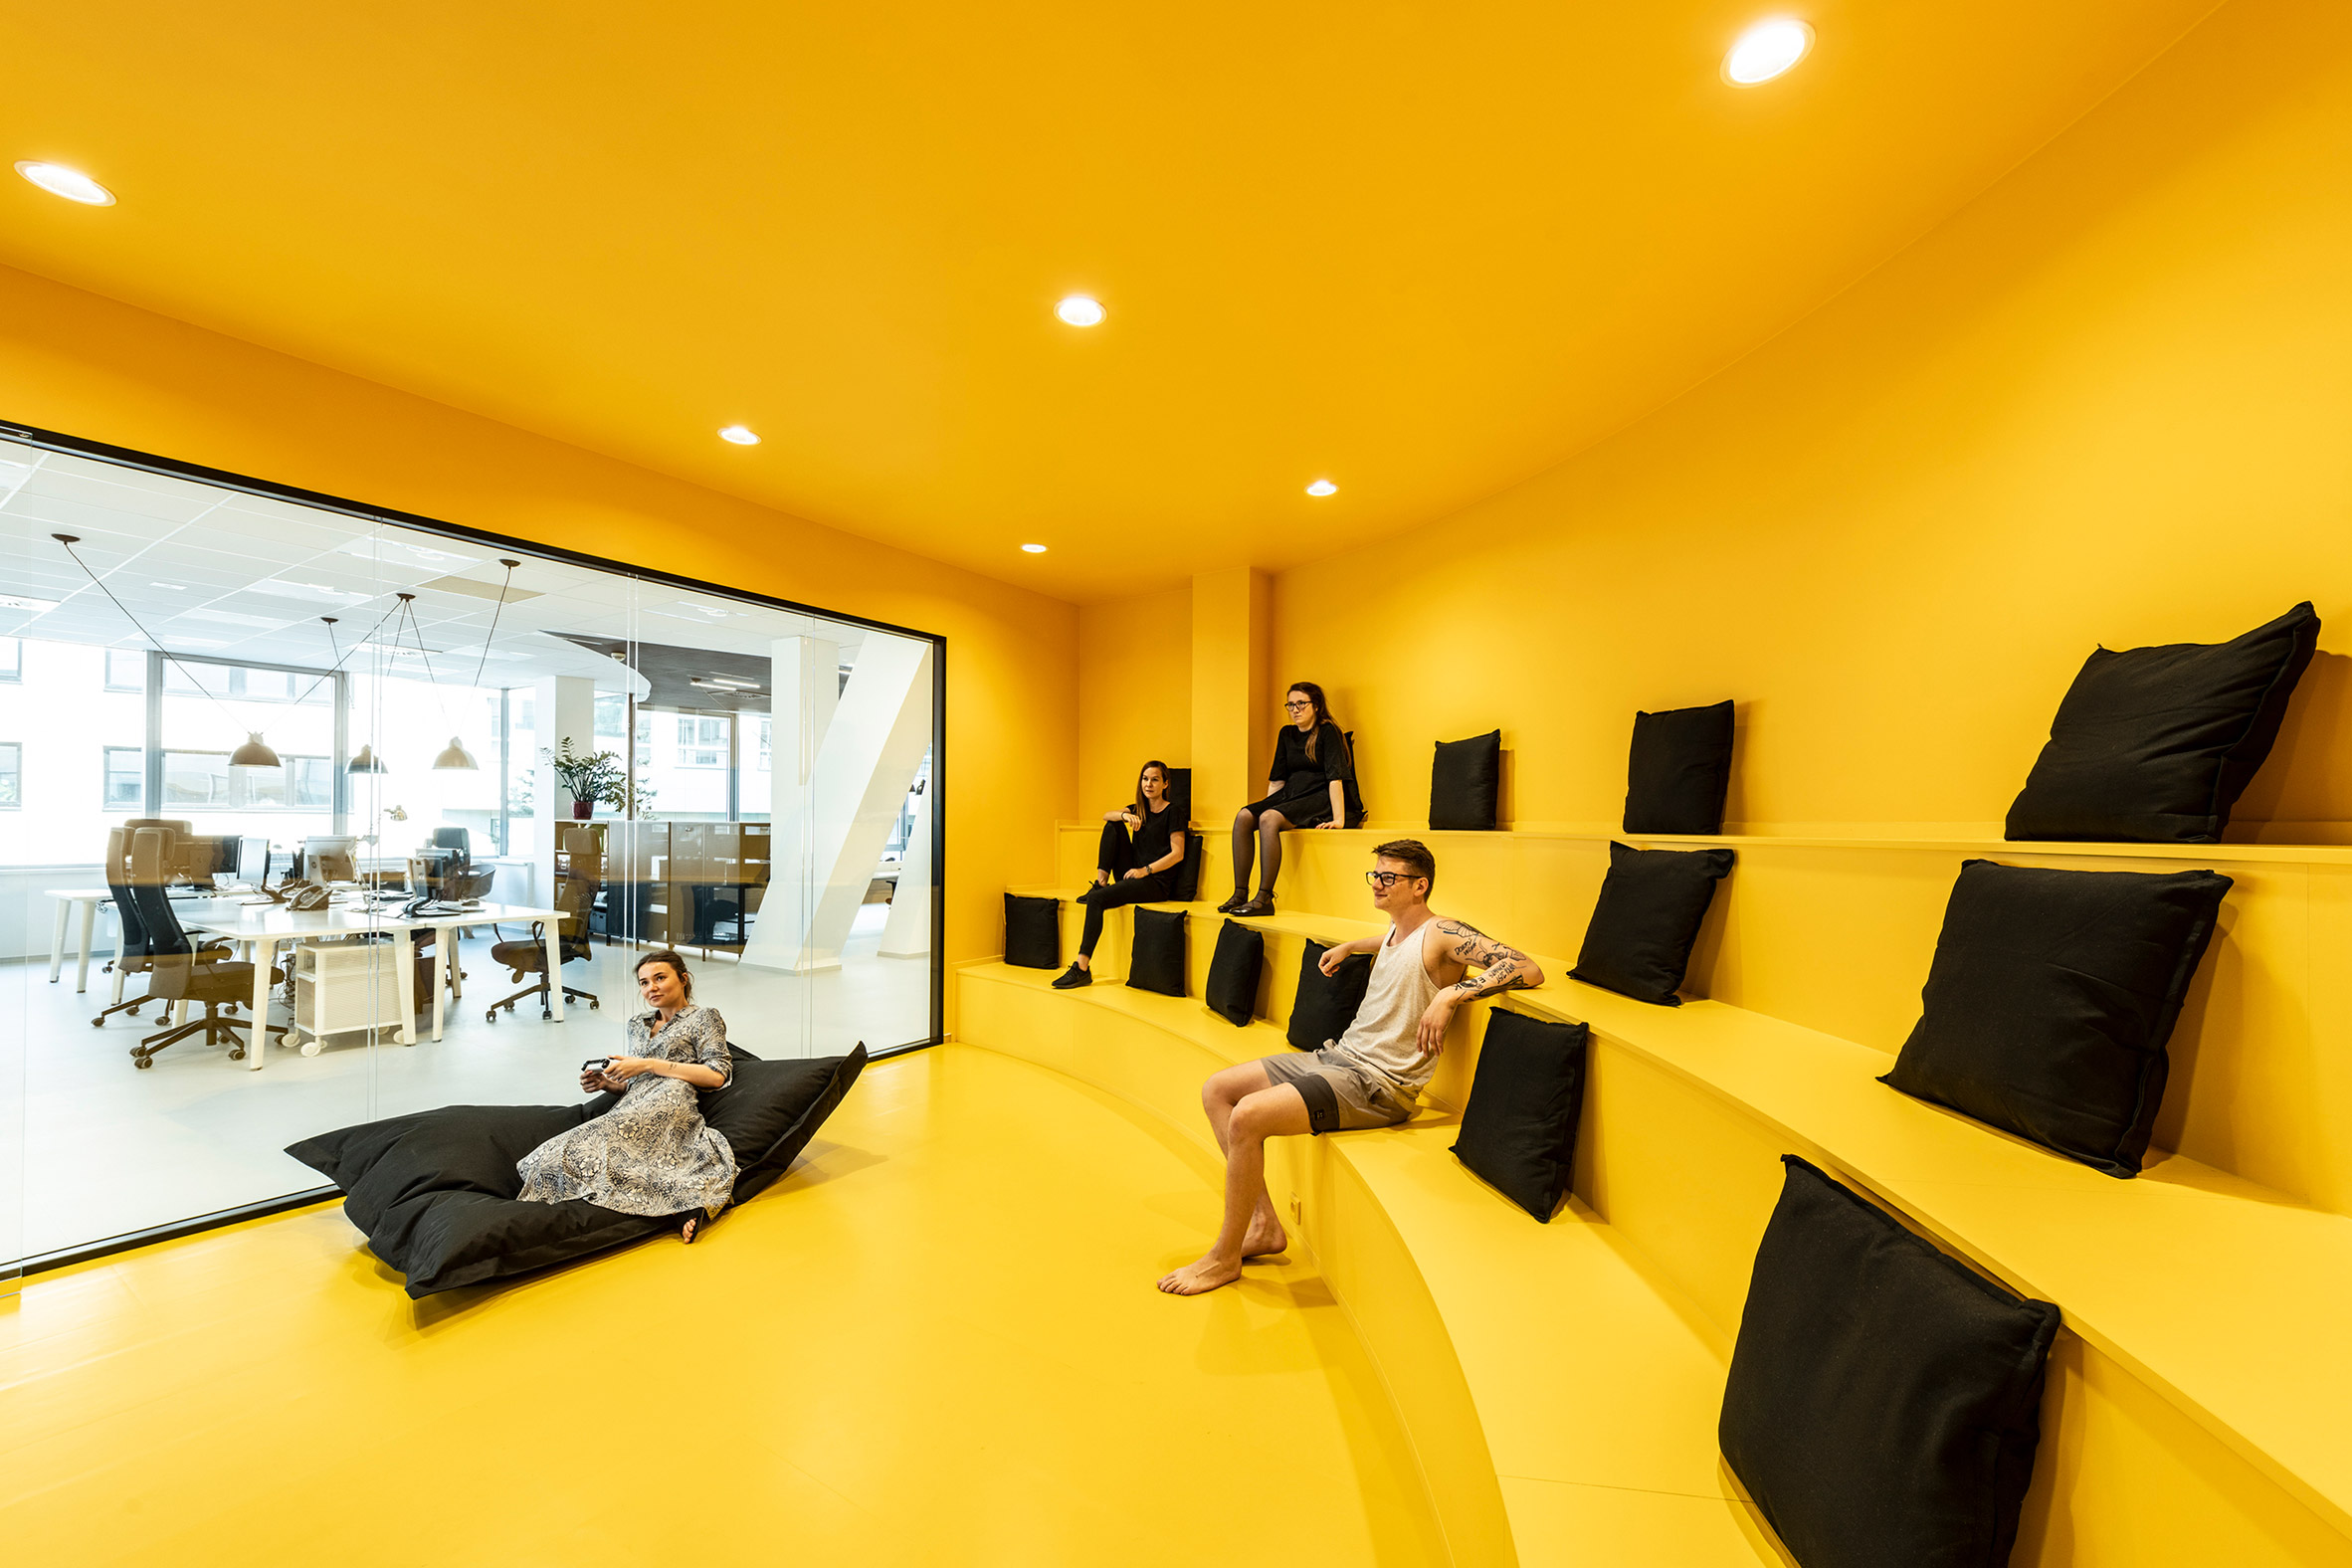 Yellow amphitheatre seating inside the office for DDB Prague by B2 Architecture, Czech Republic